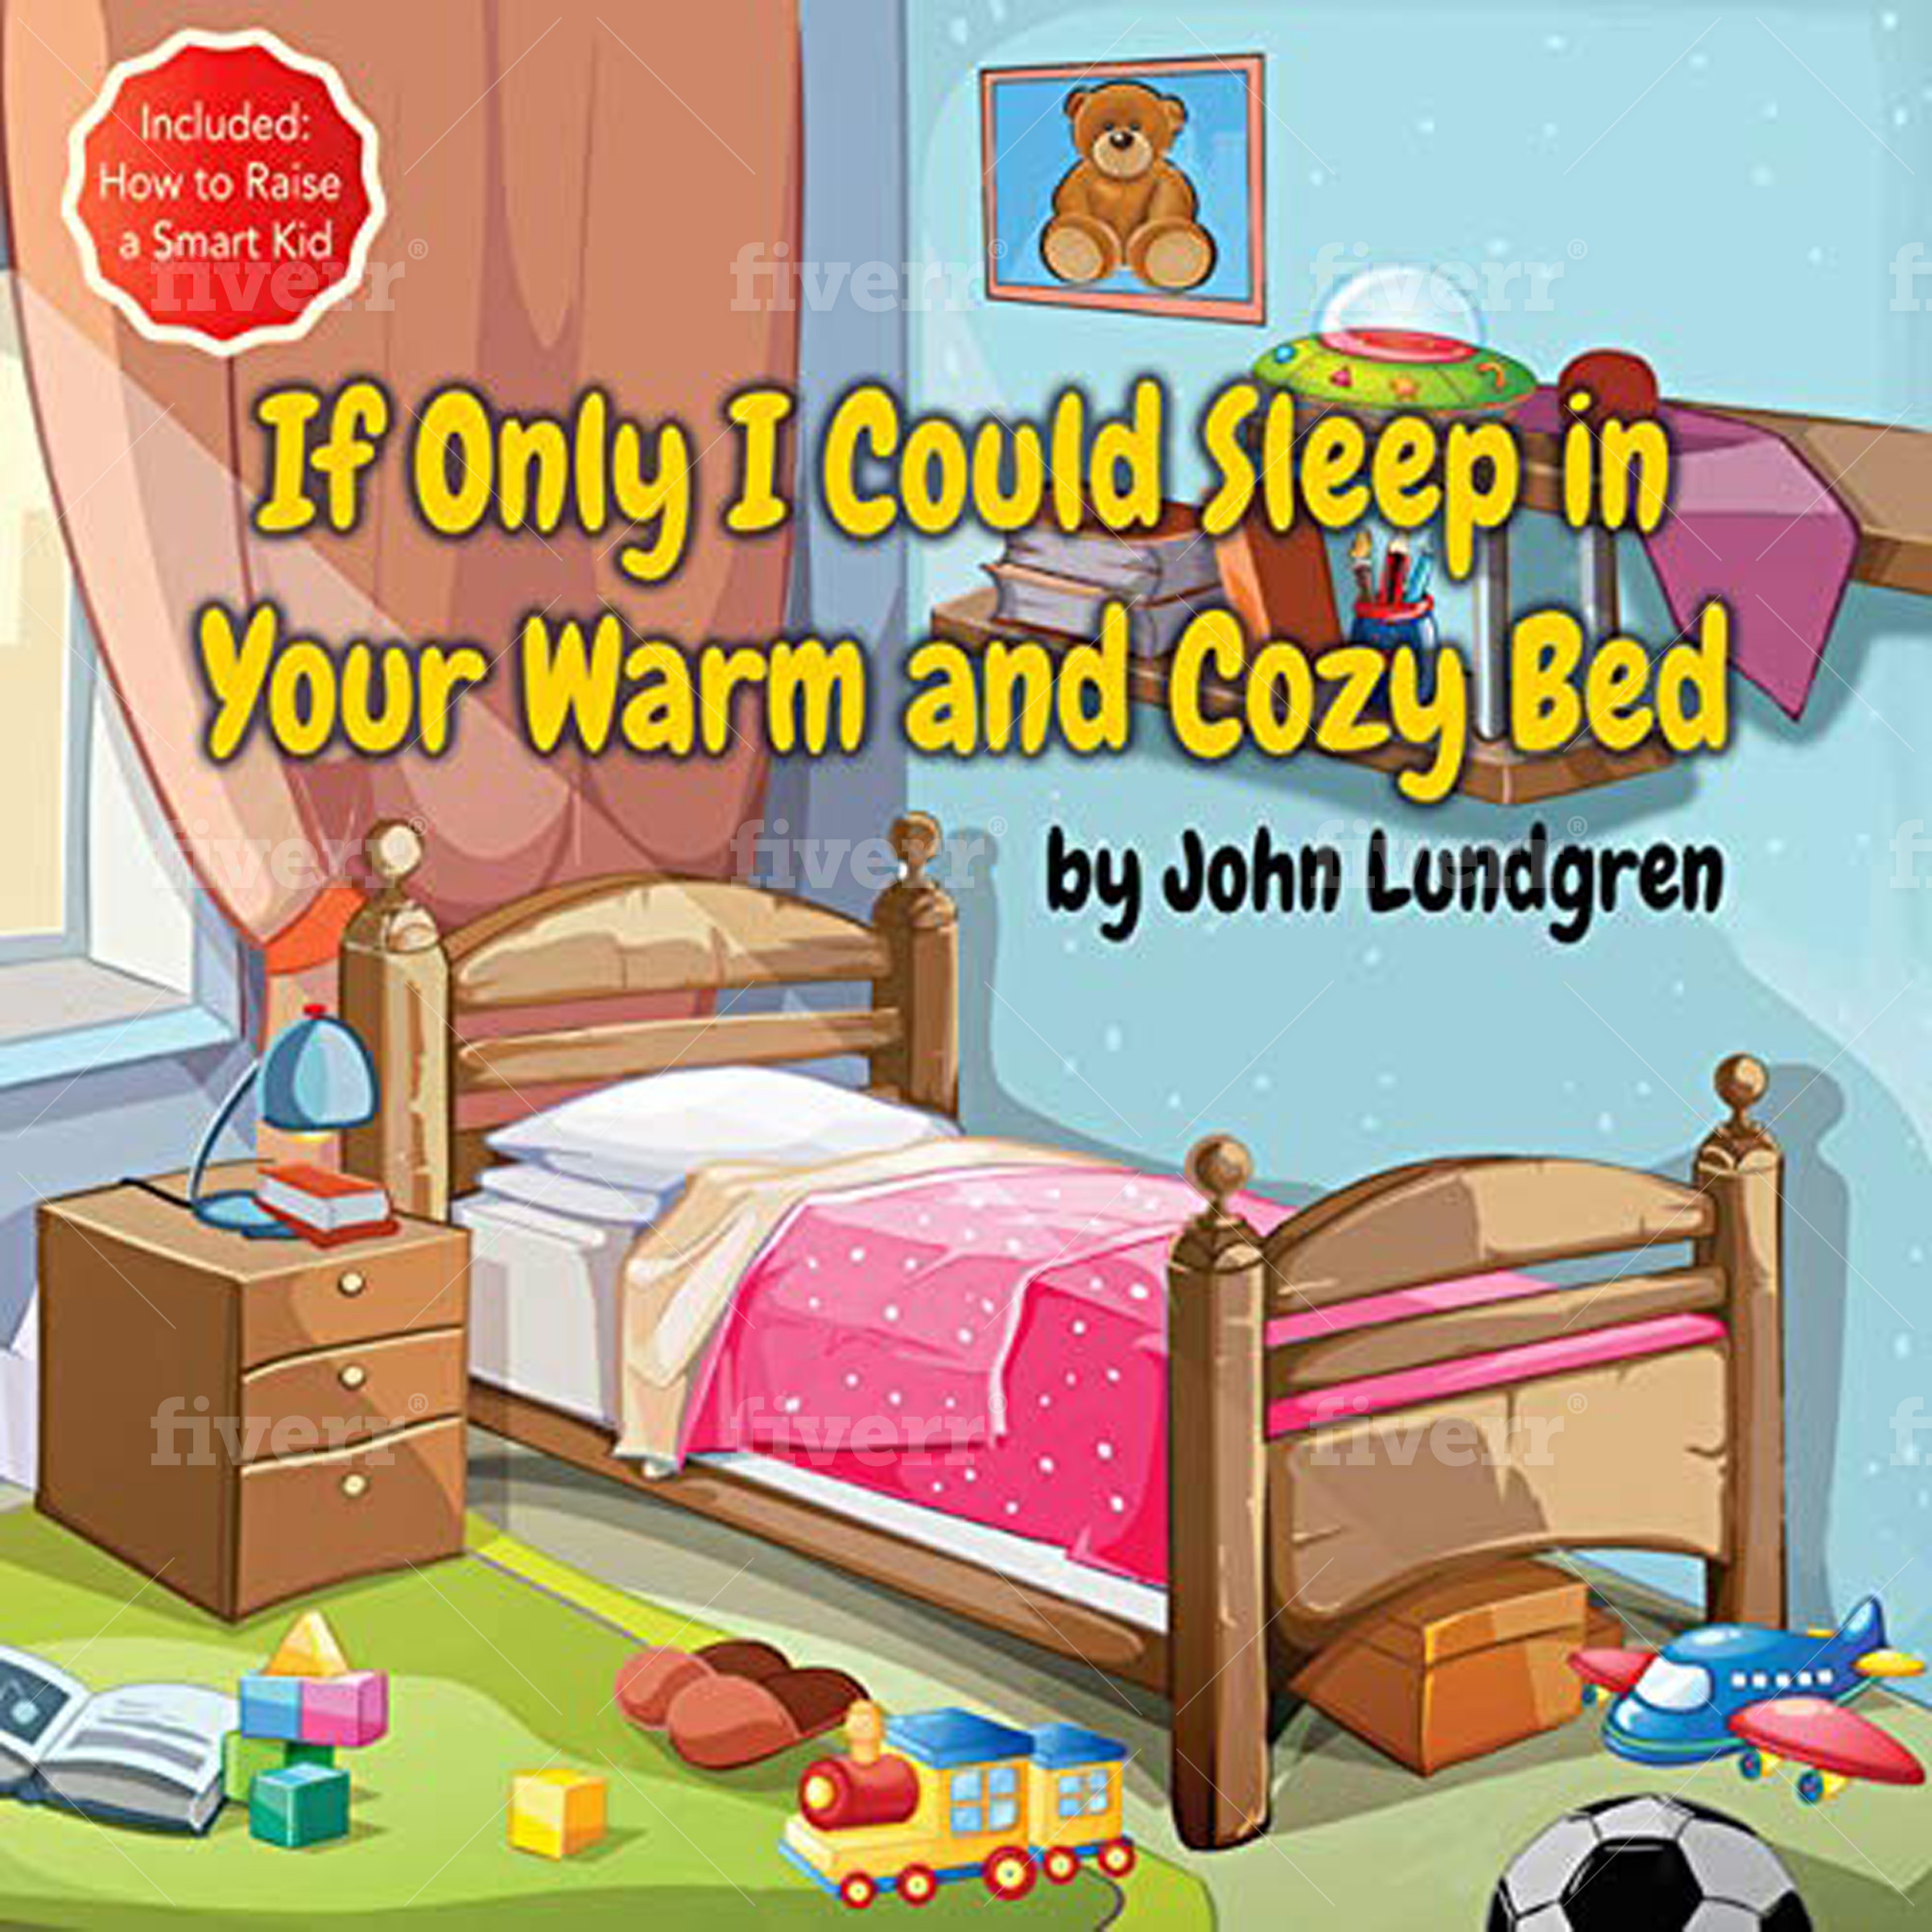 FREE: If Only I Could Sleep in Your Warm and Cozy Bed by John Lundgren by john lundgren